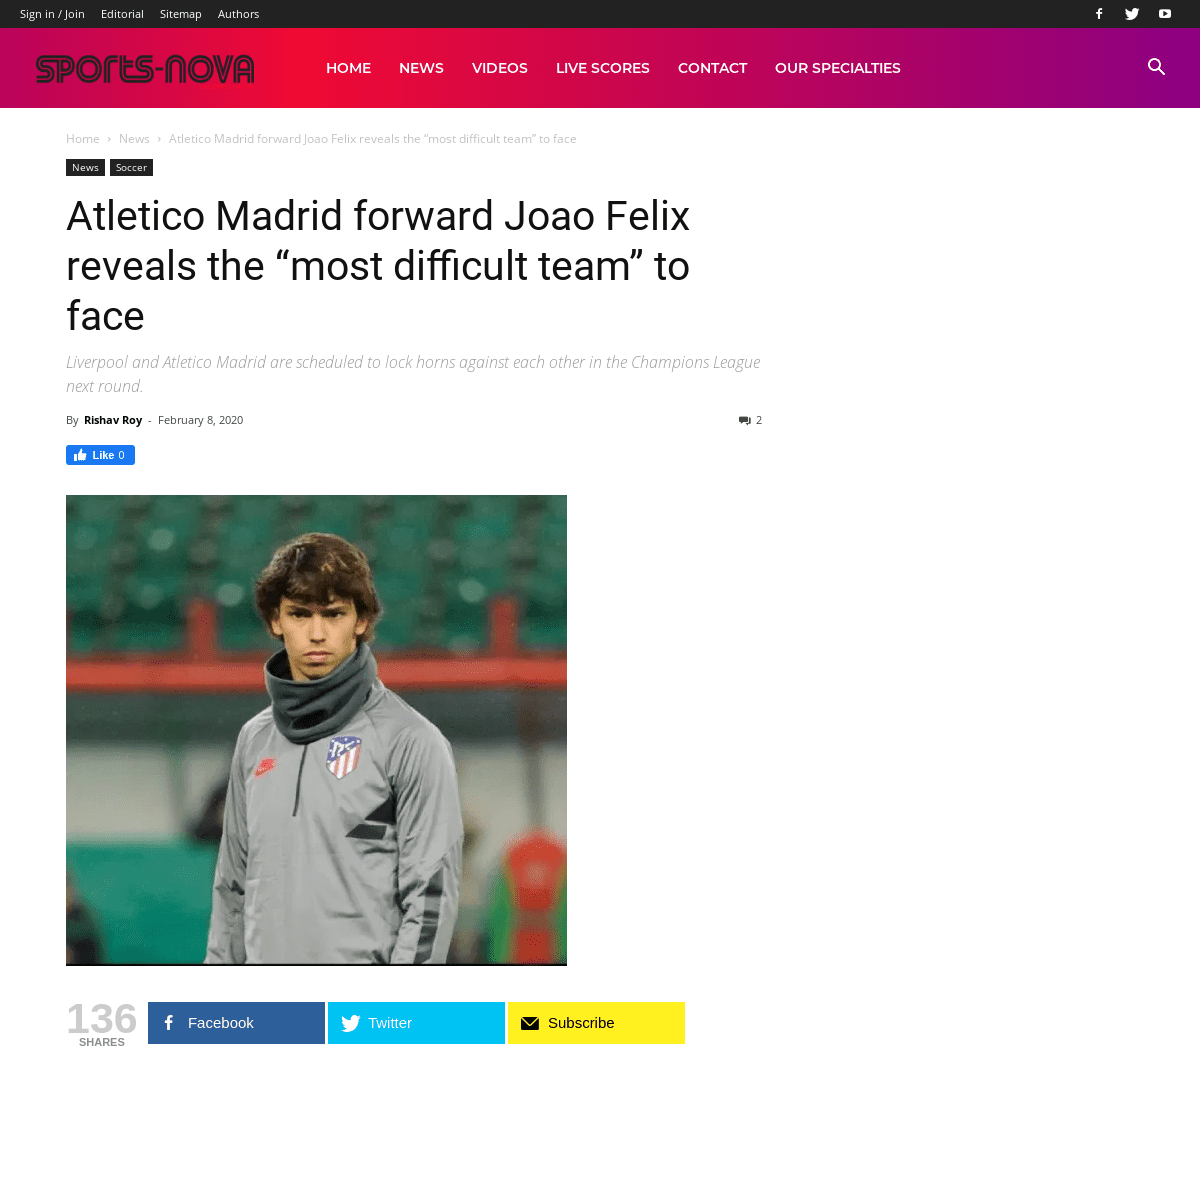 A complete backup of www.sports-nova.com/2020/02/08/atletico-madrid-forward-joao-felix-reveals-the-most-difficult-team-to-face/